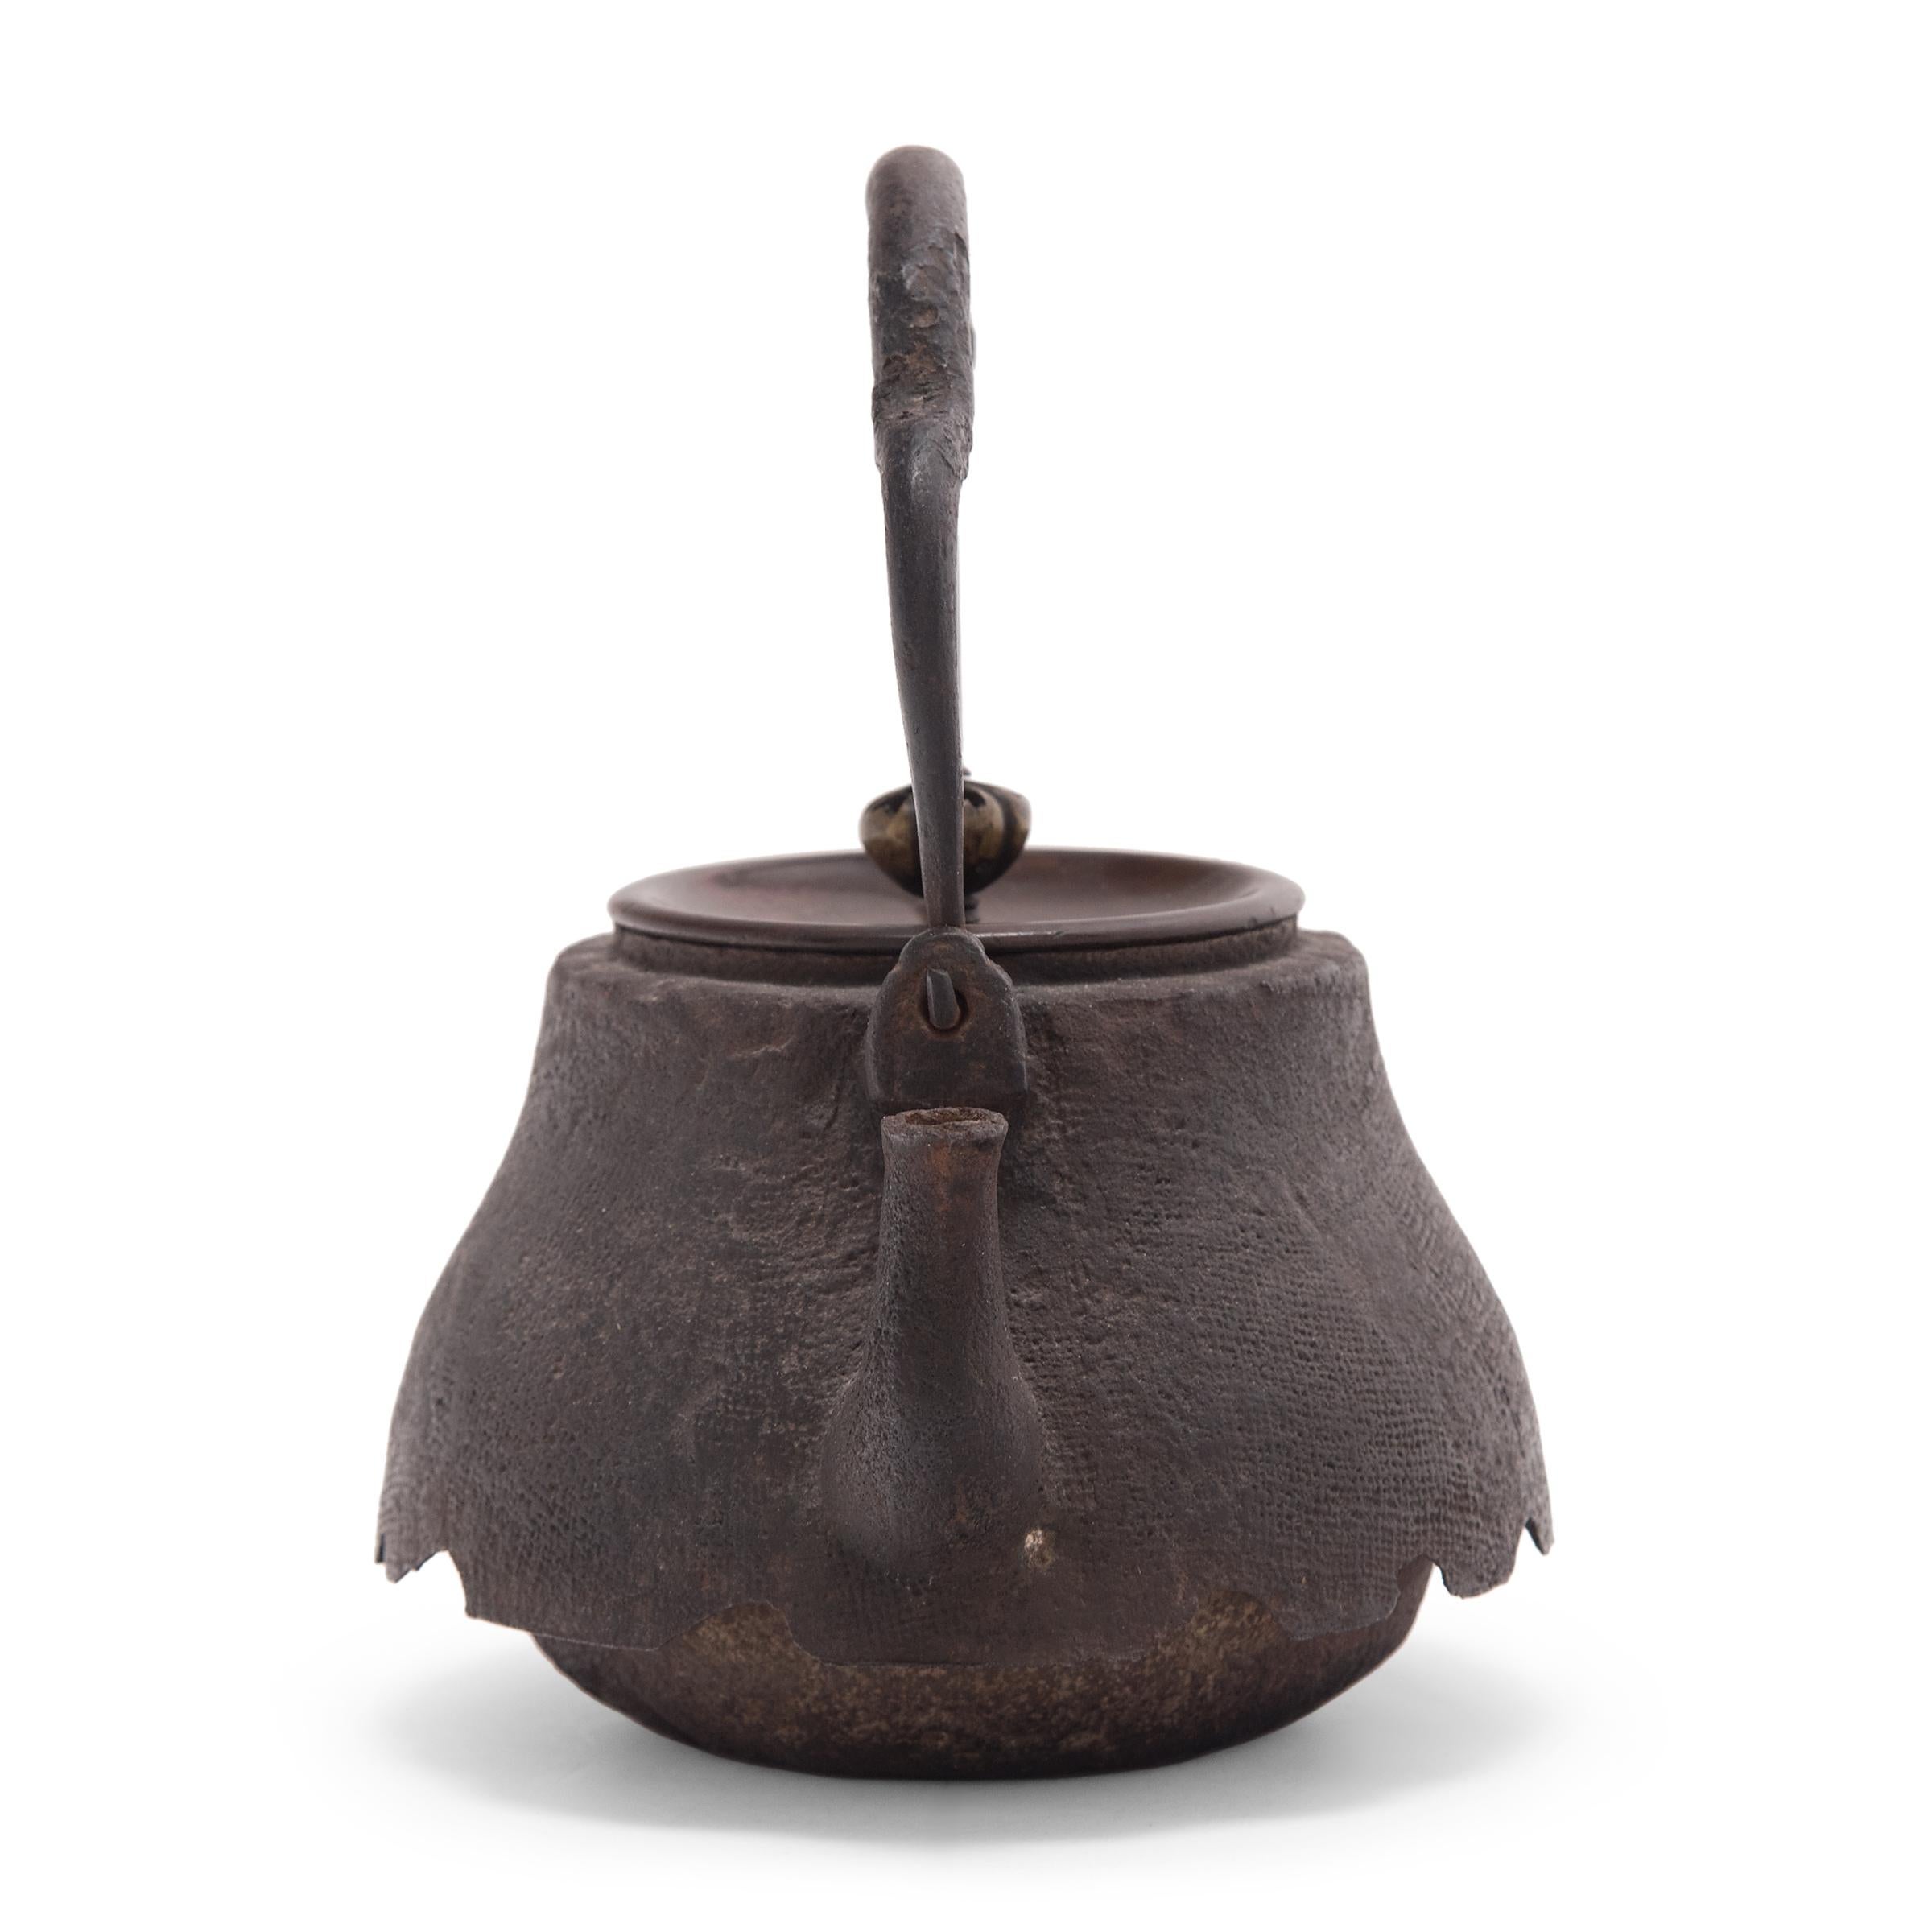 Decorated with an irregular, textured surface, this Japanese teapot was used to boil water for traditional tea ceremonies. Known as tetsubin, the kettle’s cast-iron construction is said to change the quality of the water, making tea taste mellow and